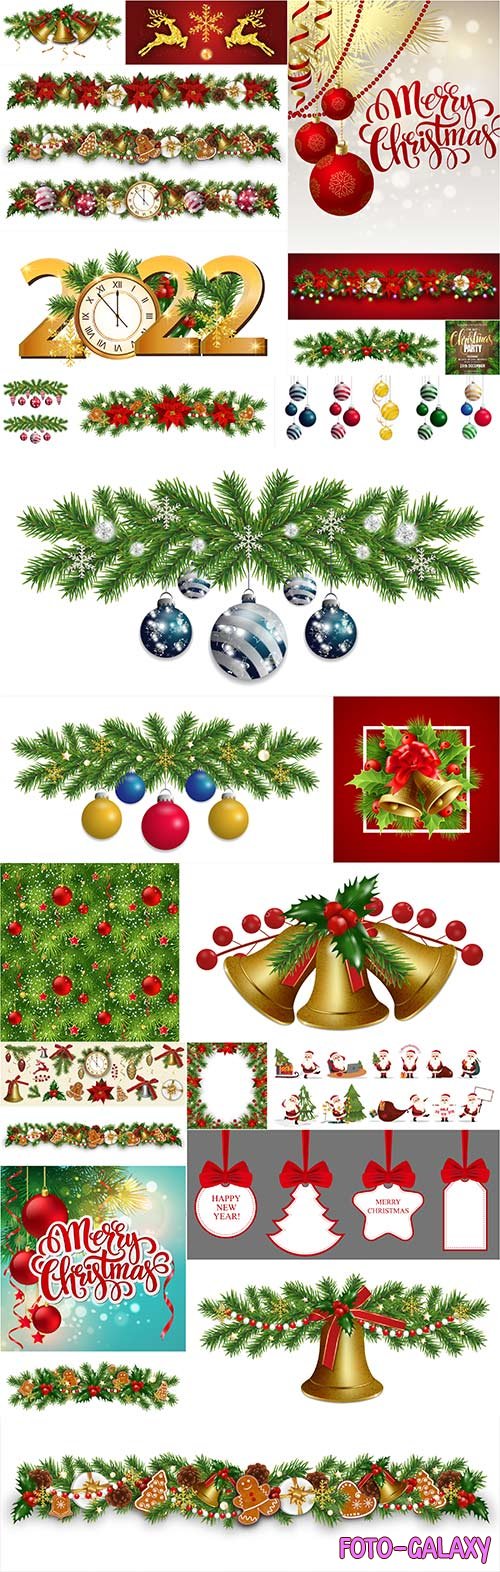 Christmas border decoration with baubles new year garland with christmas tree branches and balls